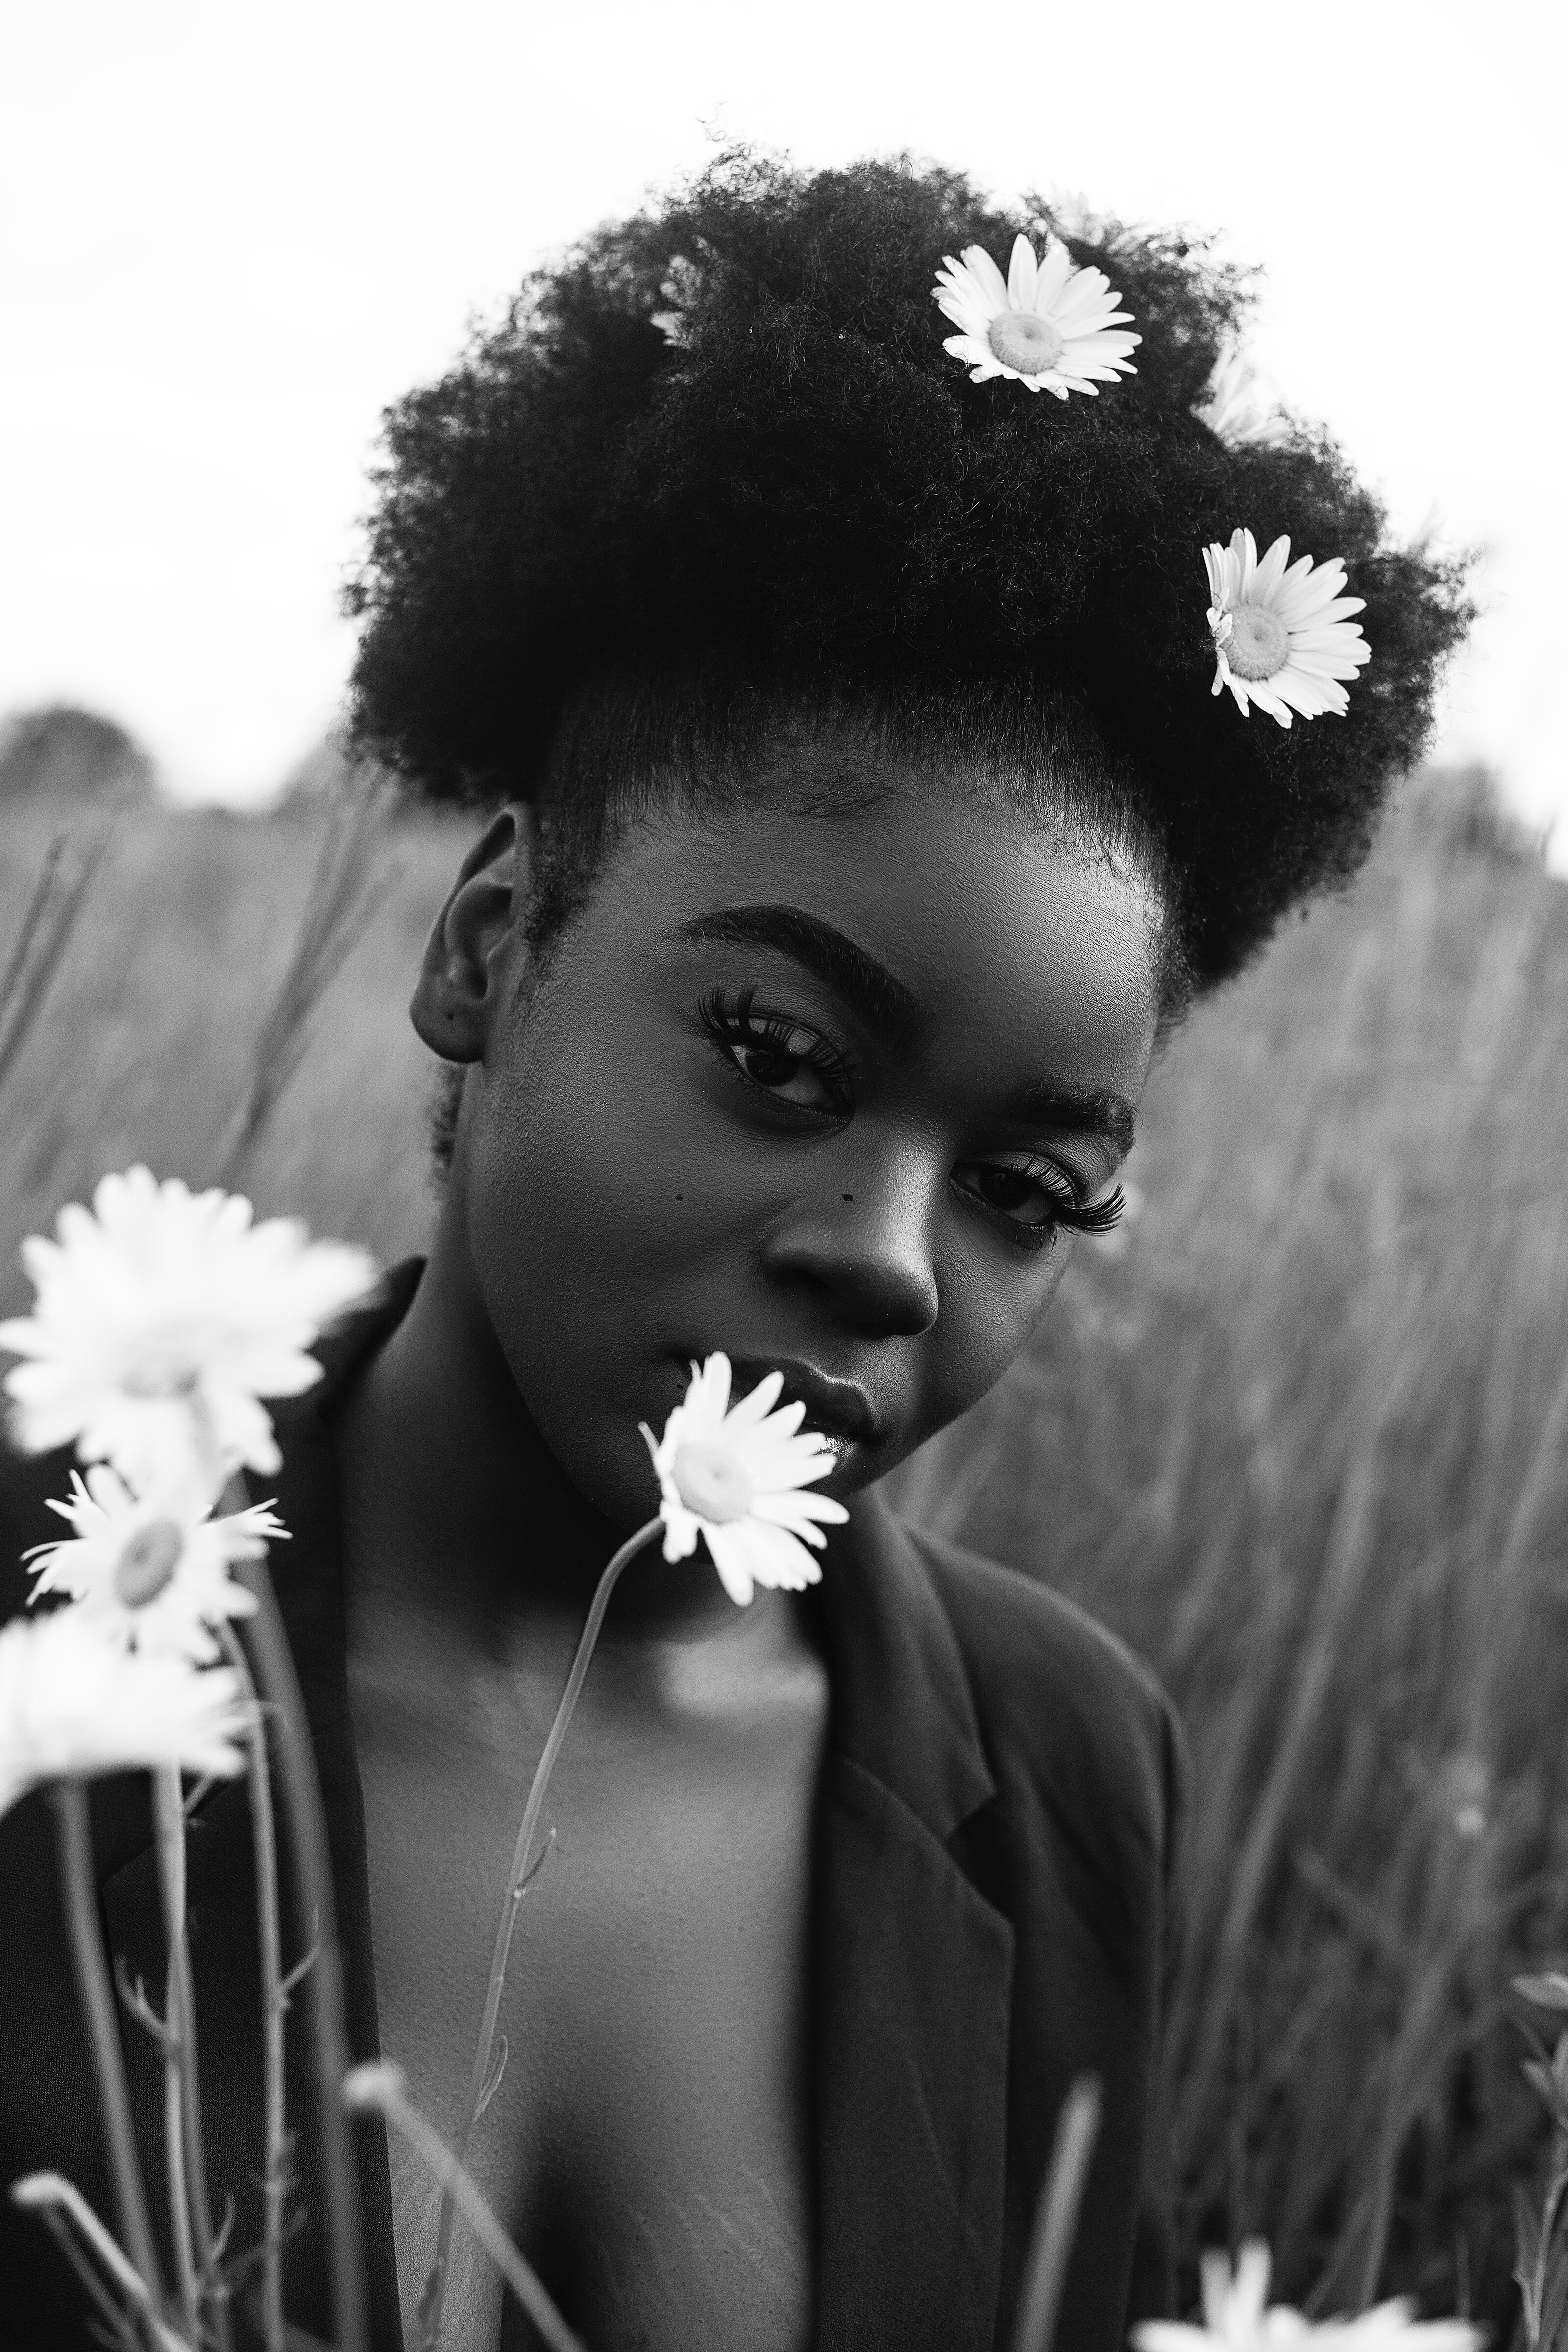 grayscale-photo-of-woman-with-daisy-on-ear-2951142